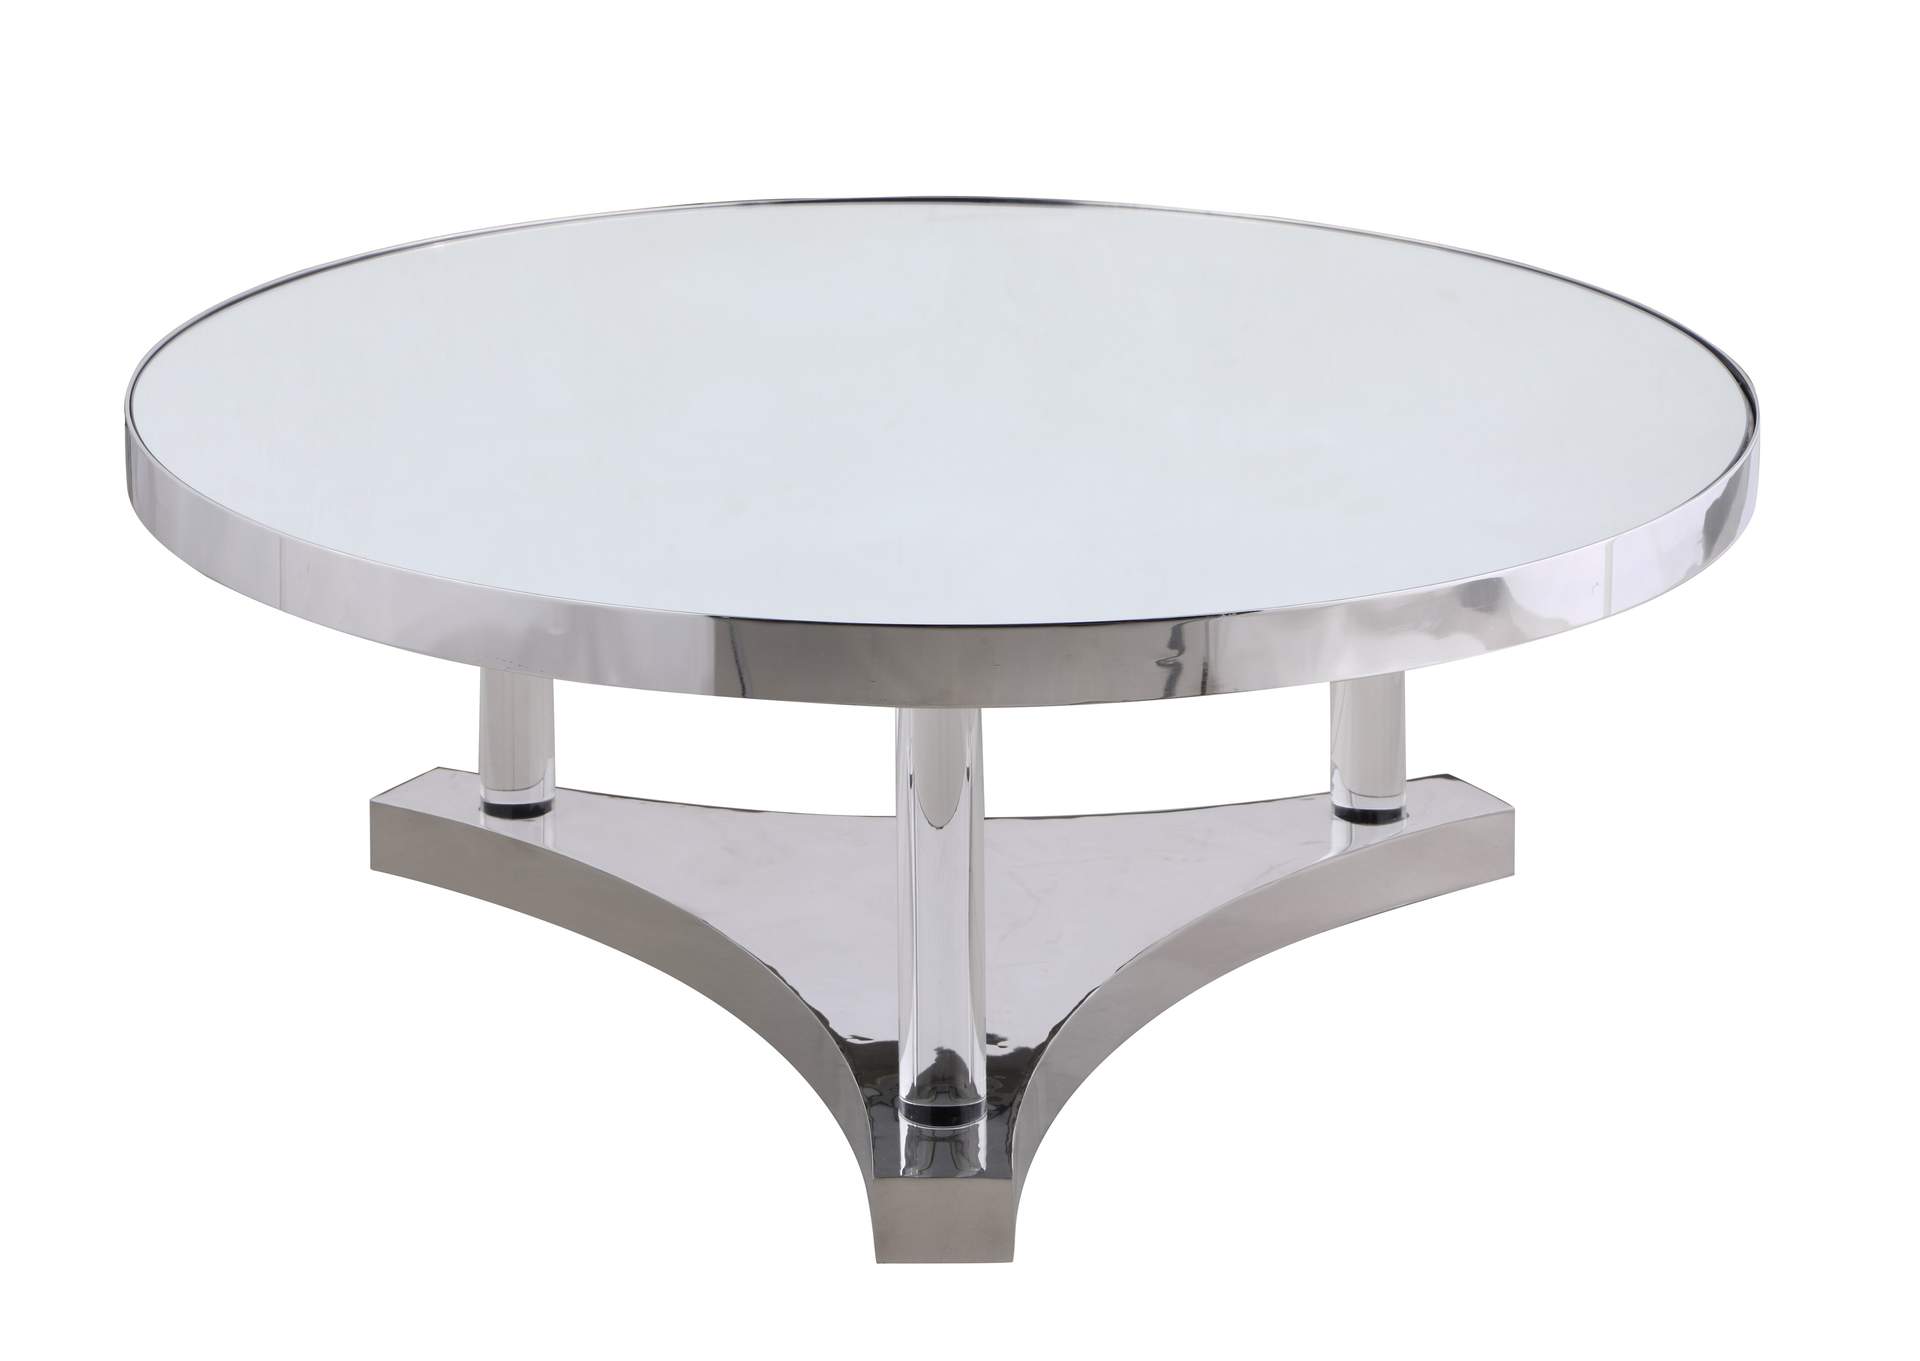 Polished SS Cocktail Table w/ Mirror Accent,Chintaly Imports